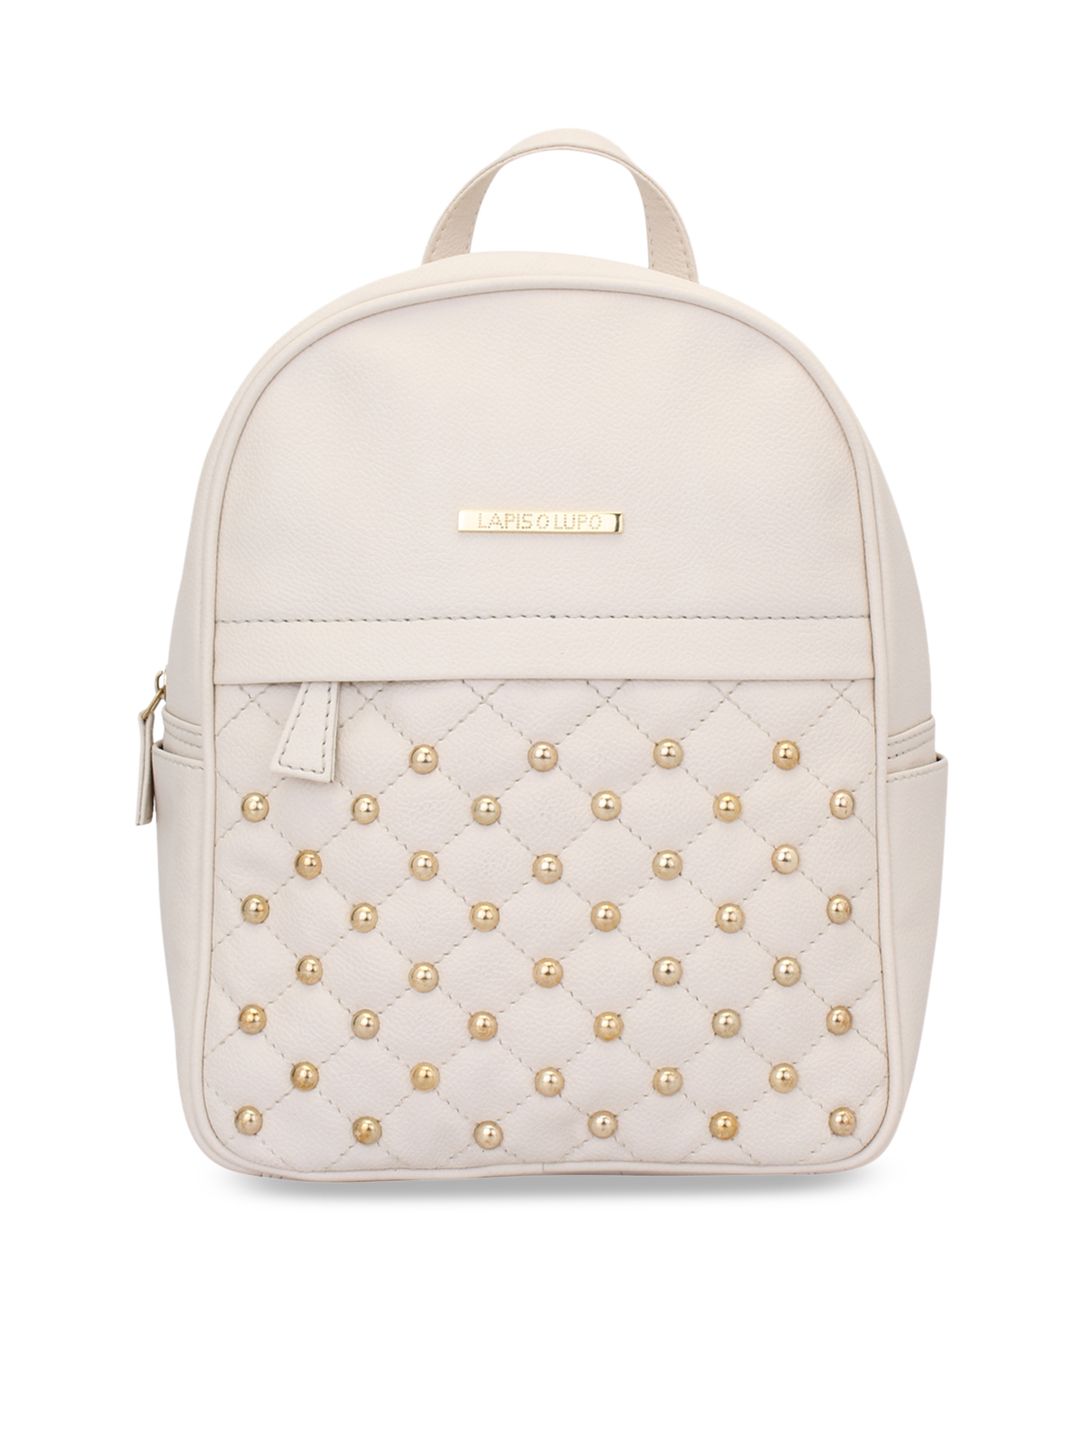 Lapis O Lupo Women Off-White Embellished Backpack Price in India